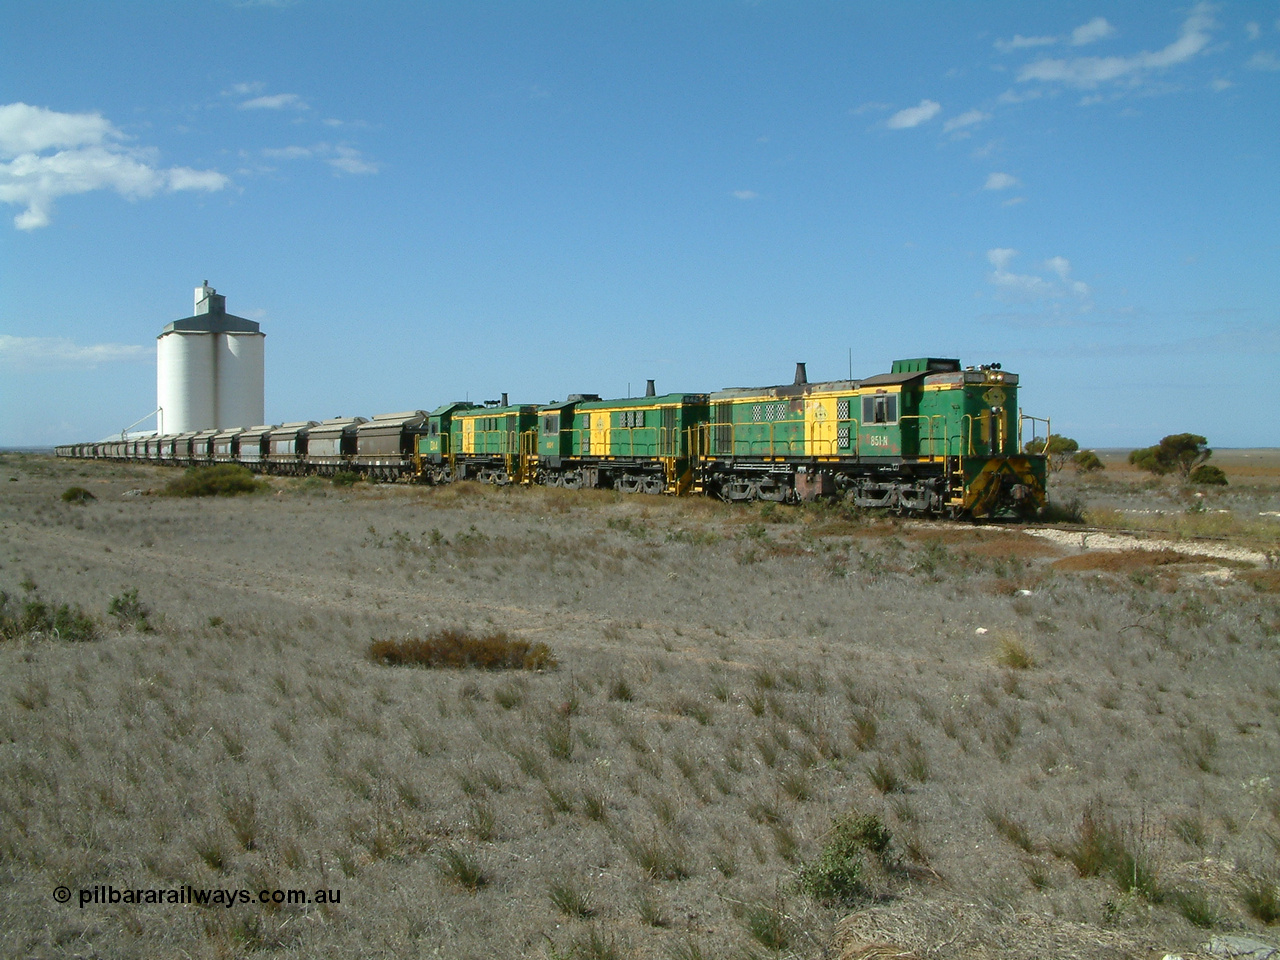 030409 140558
Wharminda, loaded grain train arrives behind 830 class unit 851 AE Goodwin ALCo model DL531 serial 84137, 851 has spent its entire operating career on the Eyre Peninsula, with fellow 830 class 842 serial 84140 and a rebuilt unit DA 4 as they stop to pick up loaded waggons.
Keywords: 830-class;851;84137;AE-Goodwin;ALCo;DL531;